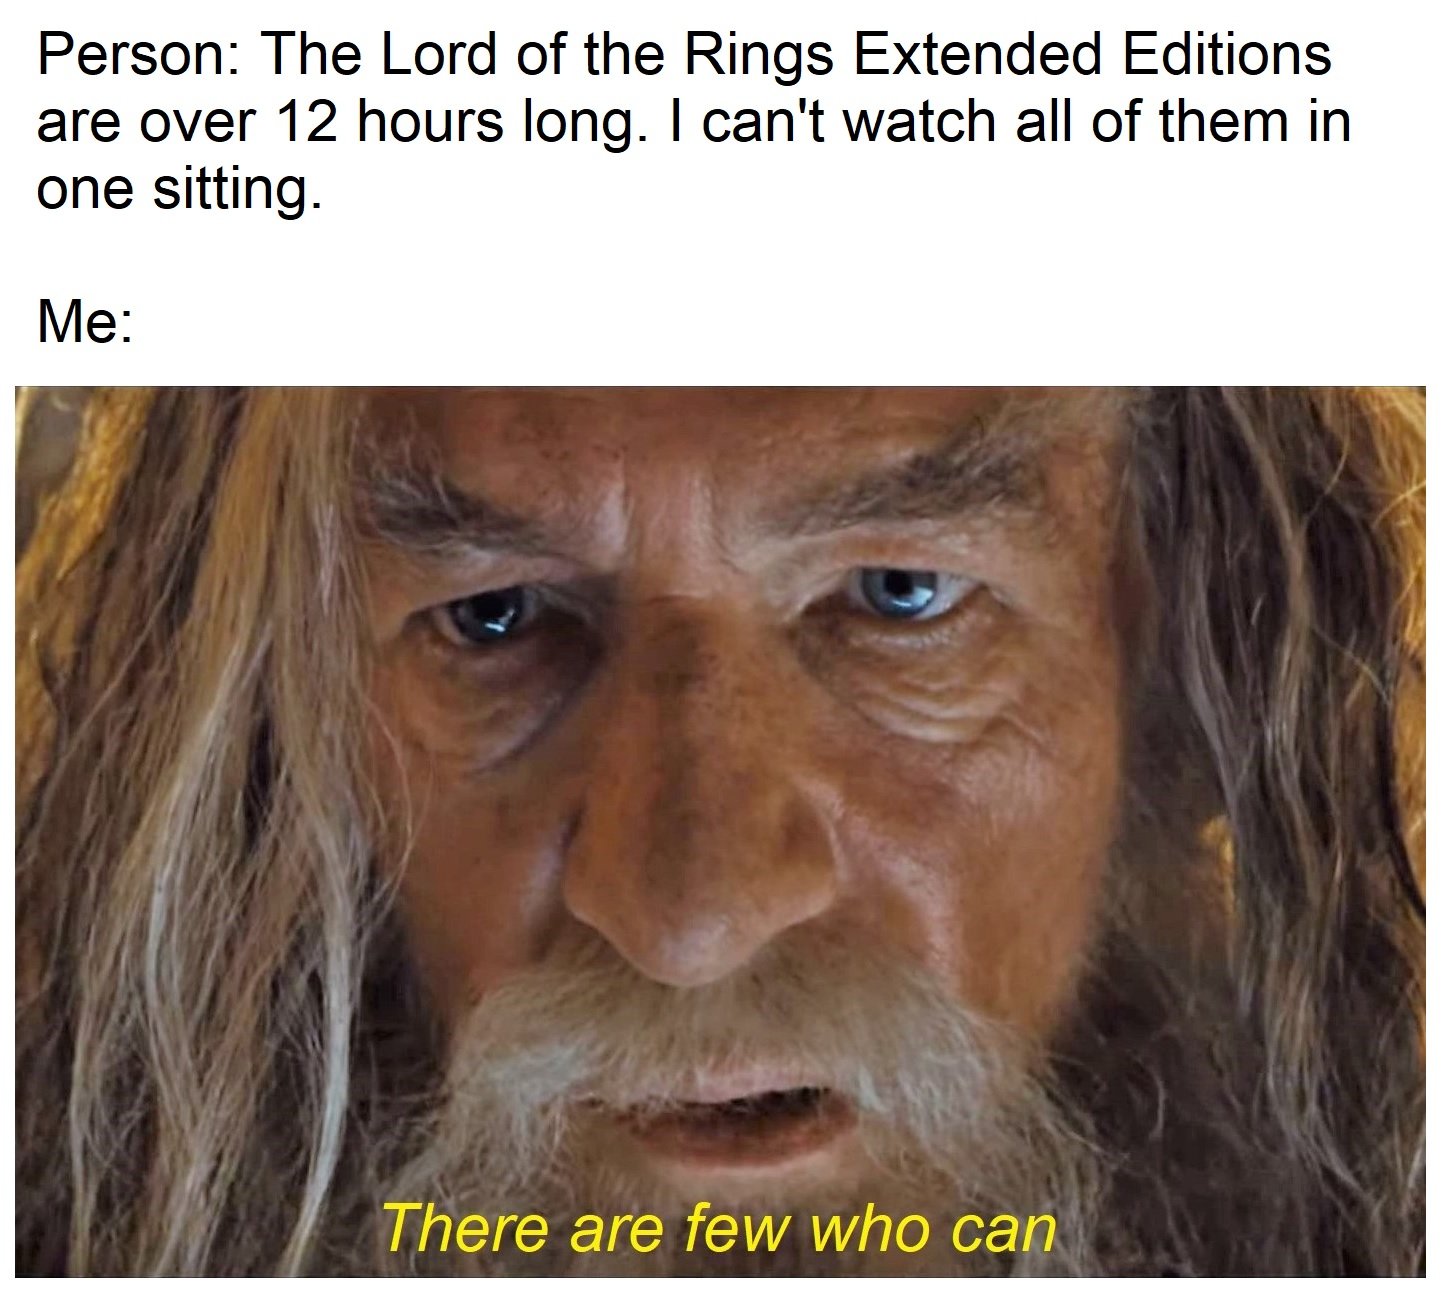 lord of the rings meem.